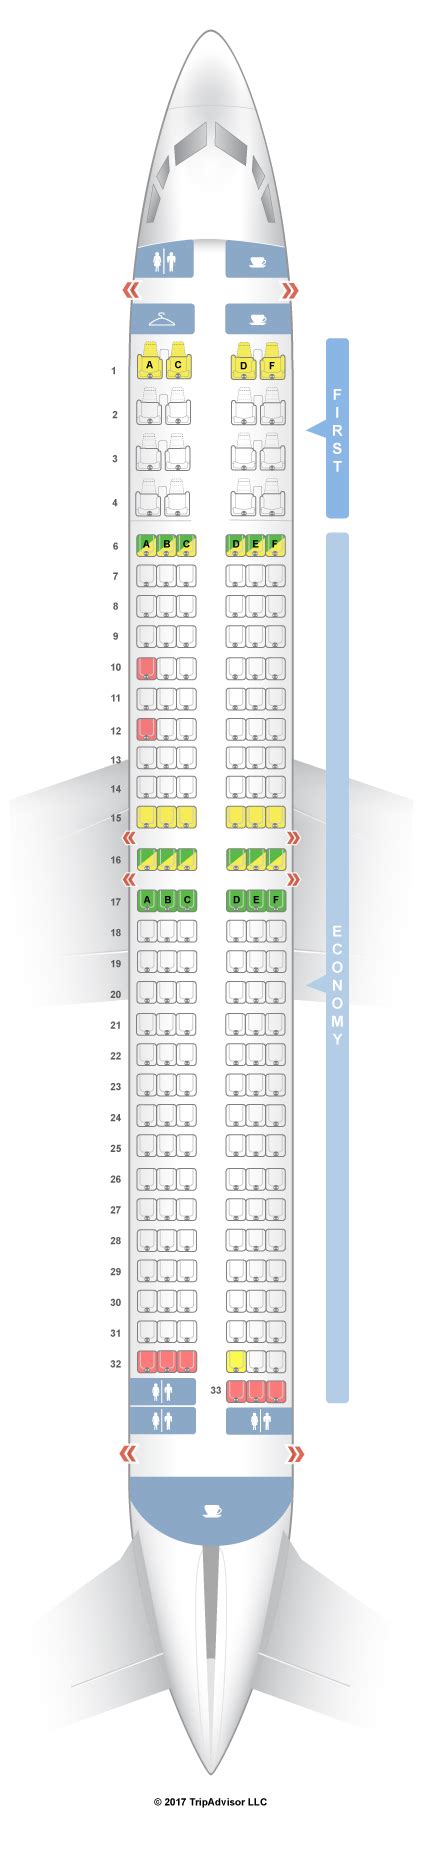 Contact information for renew-deutschland.de - The latest seat maps of Alaska Airlines (AS) Boeing 737-900 (739) aircraft Alaska Airlines Boeing 737-900Configured 16F 162M, including 24 designated Premium Class seats (indicated in the seating plan with navy accents)Equipped with Boeing Sky Interiors and Boeing Space BinsAll seats have 110V universal AC and USB sockets.Gogo ATG-4 onboard Wi-Fi